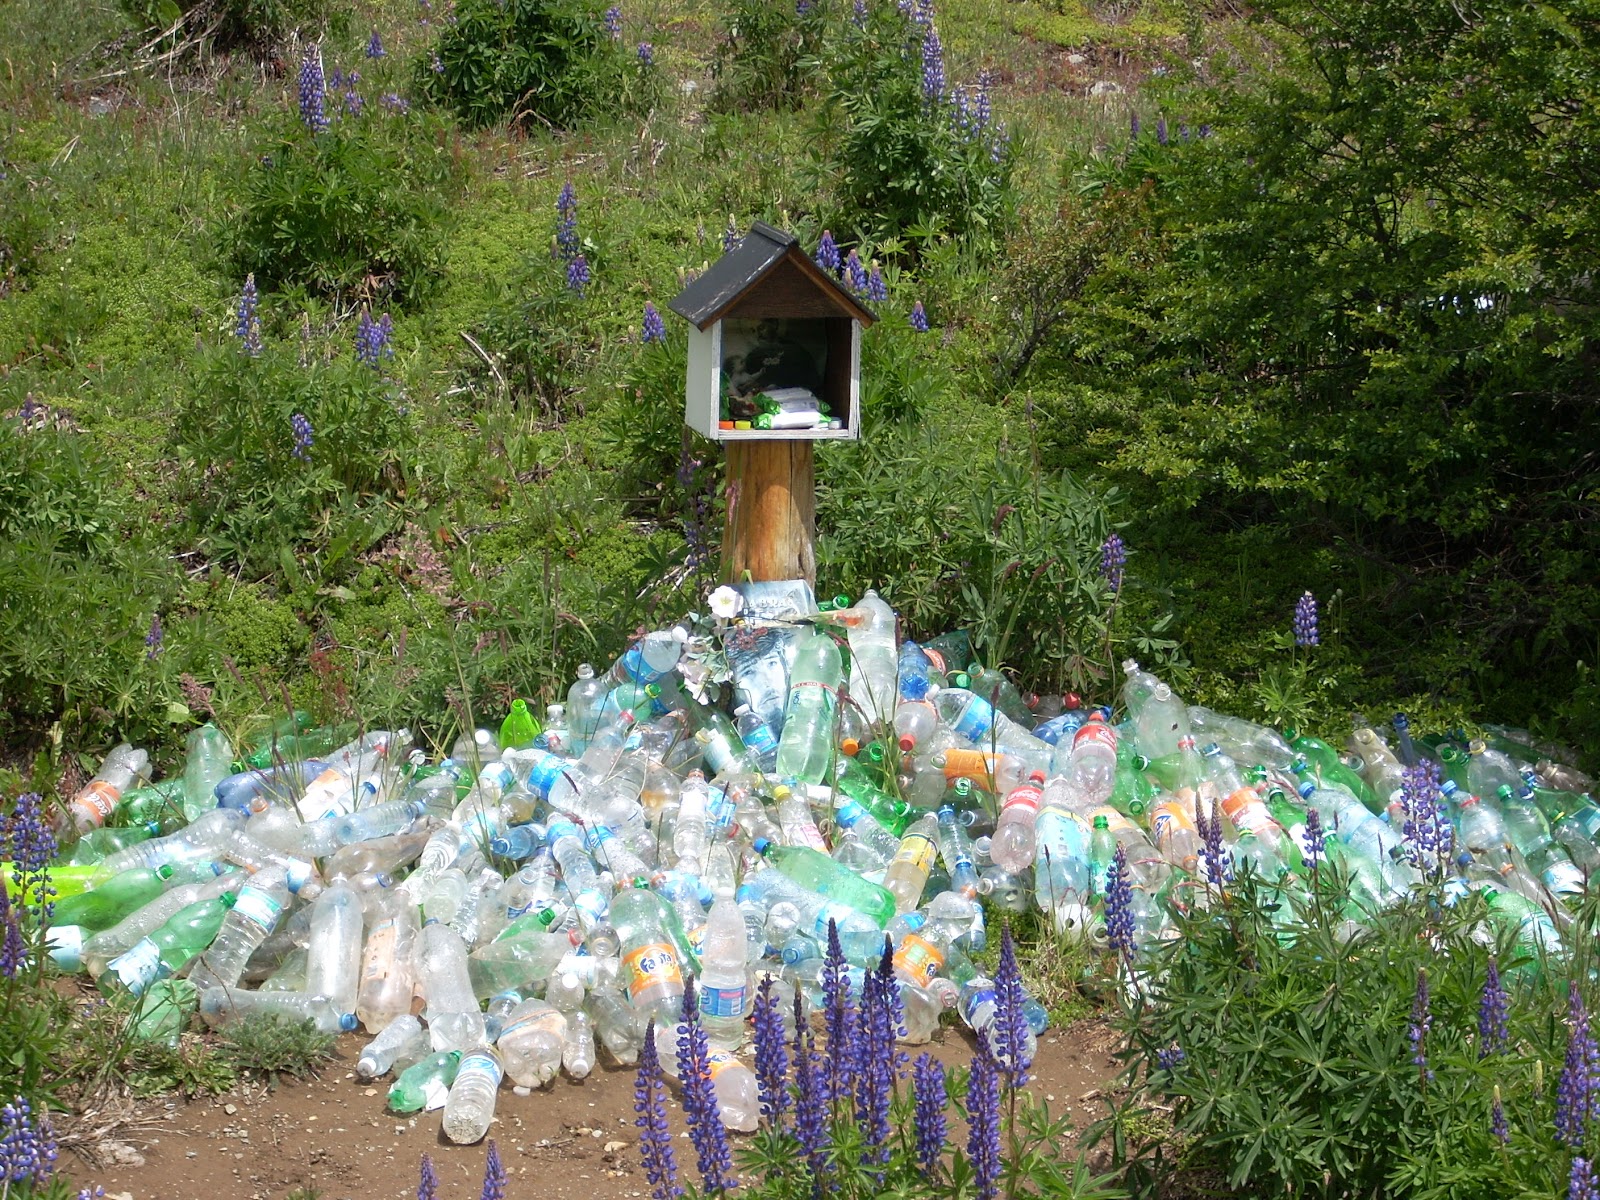 I´m not quite sure why you should leave a plastic bottle at this shrine